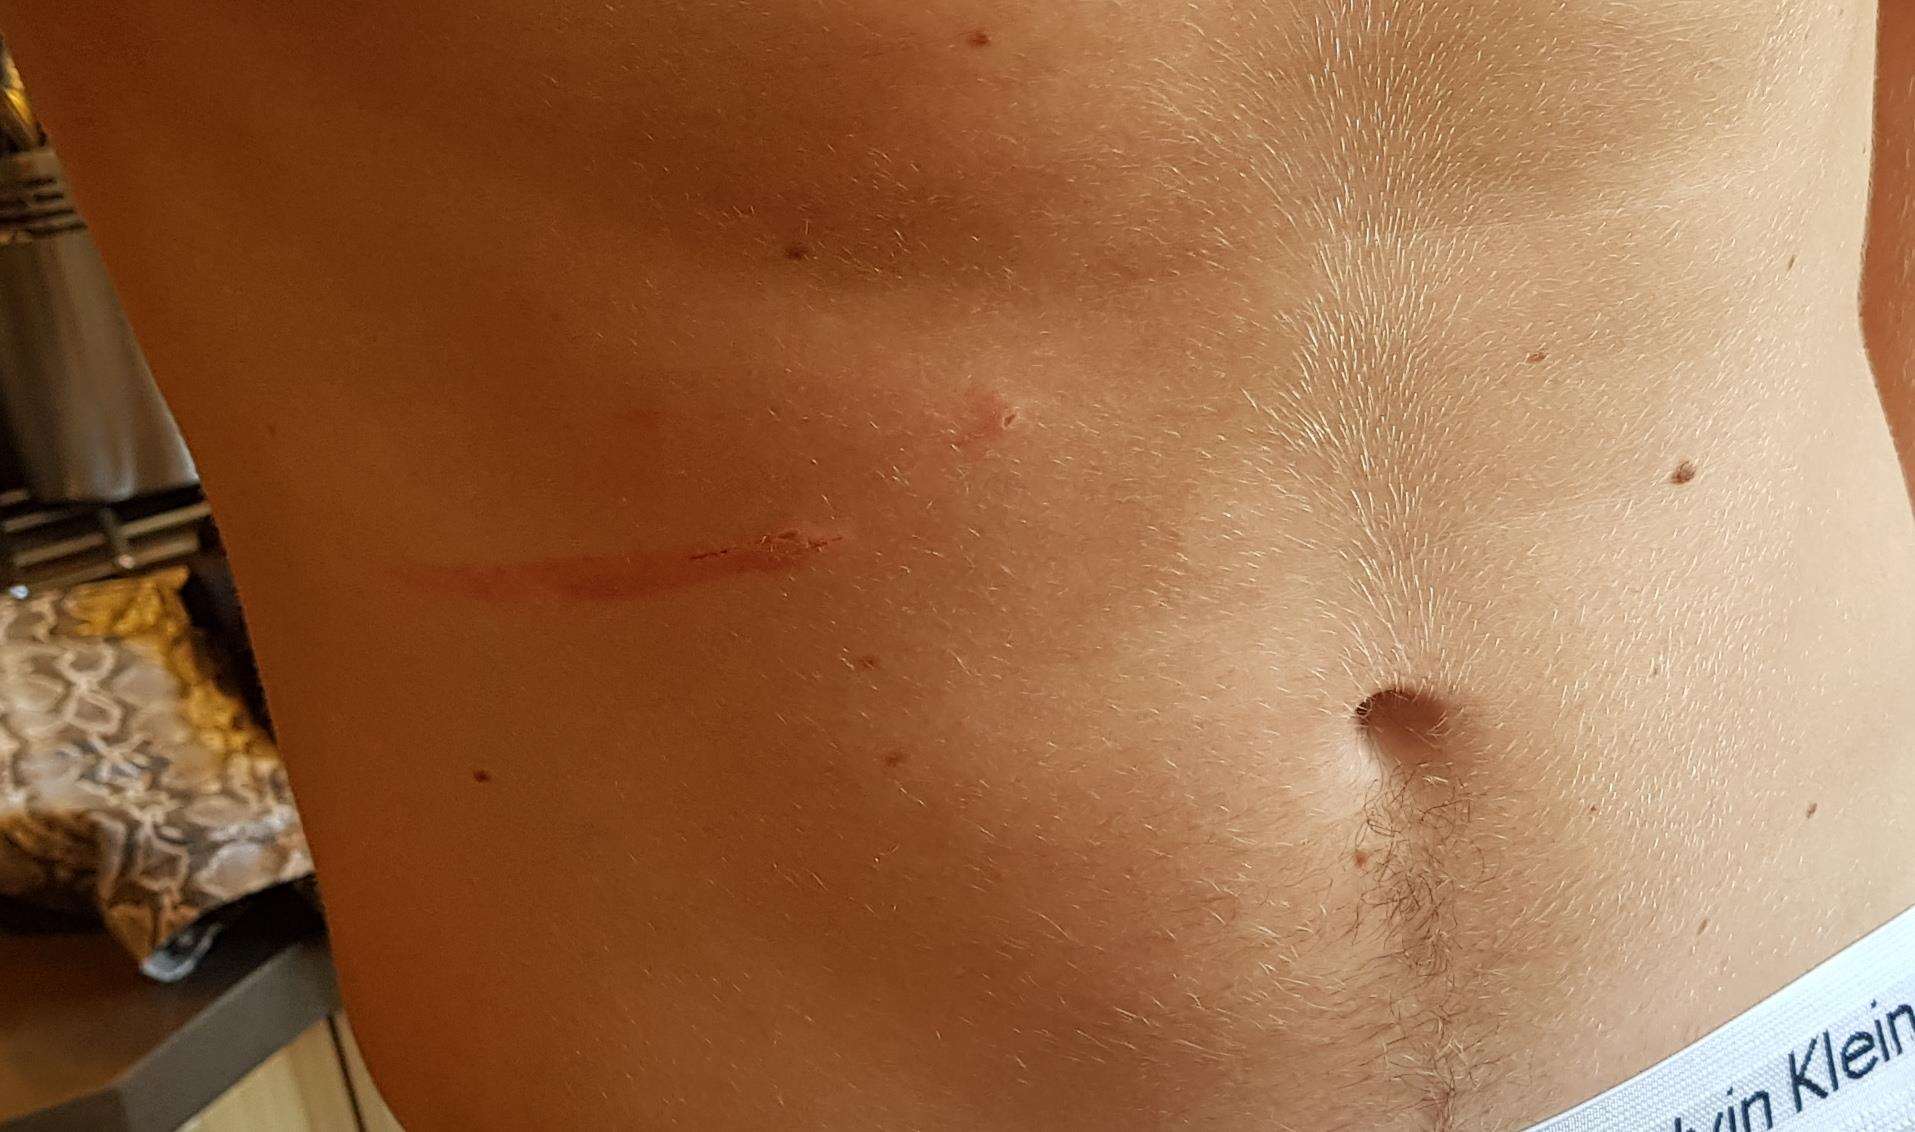 The teenager suffered a slash wound to his stomach